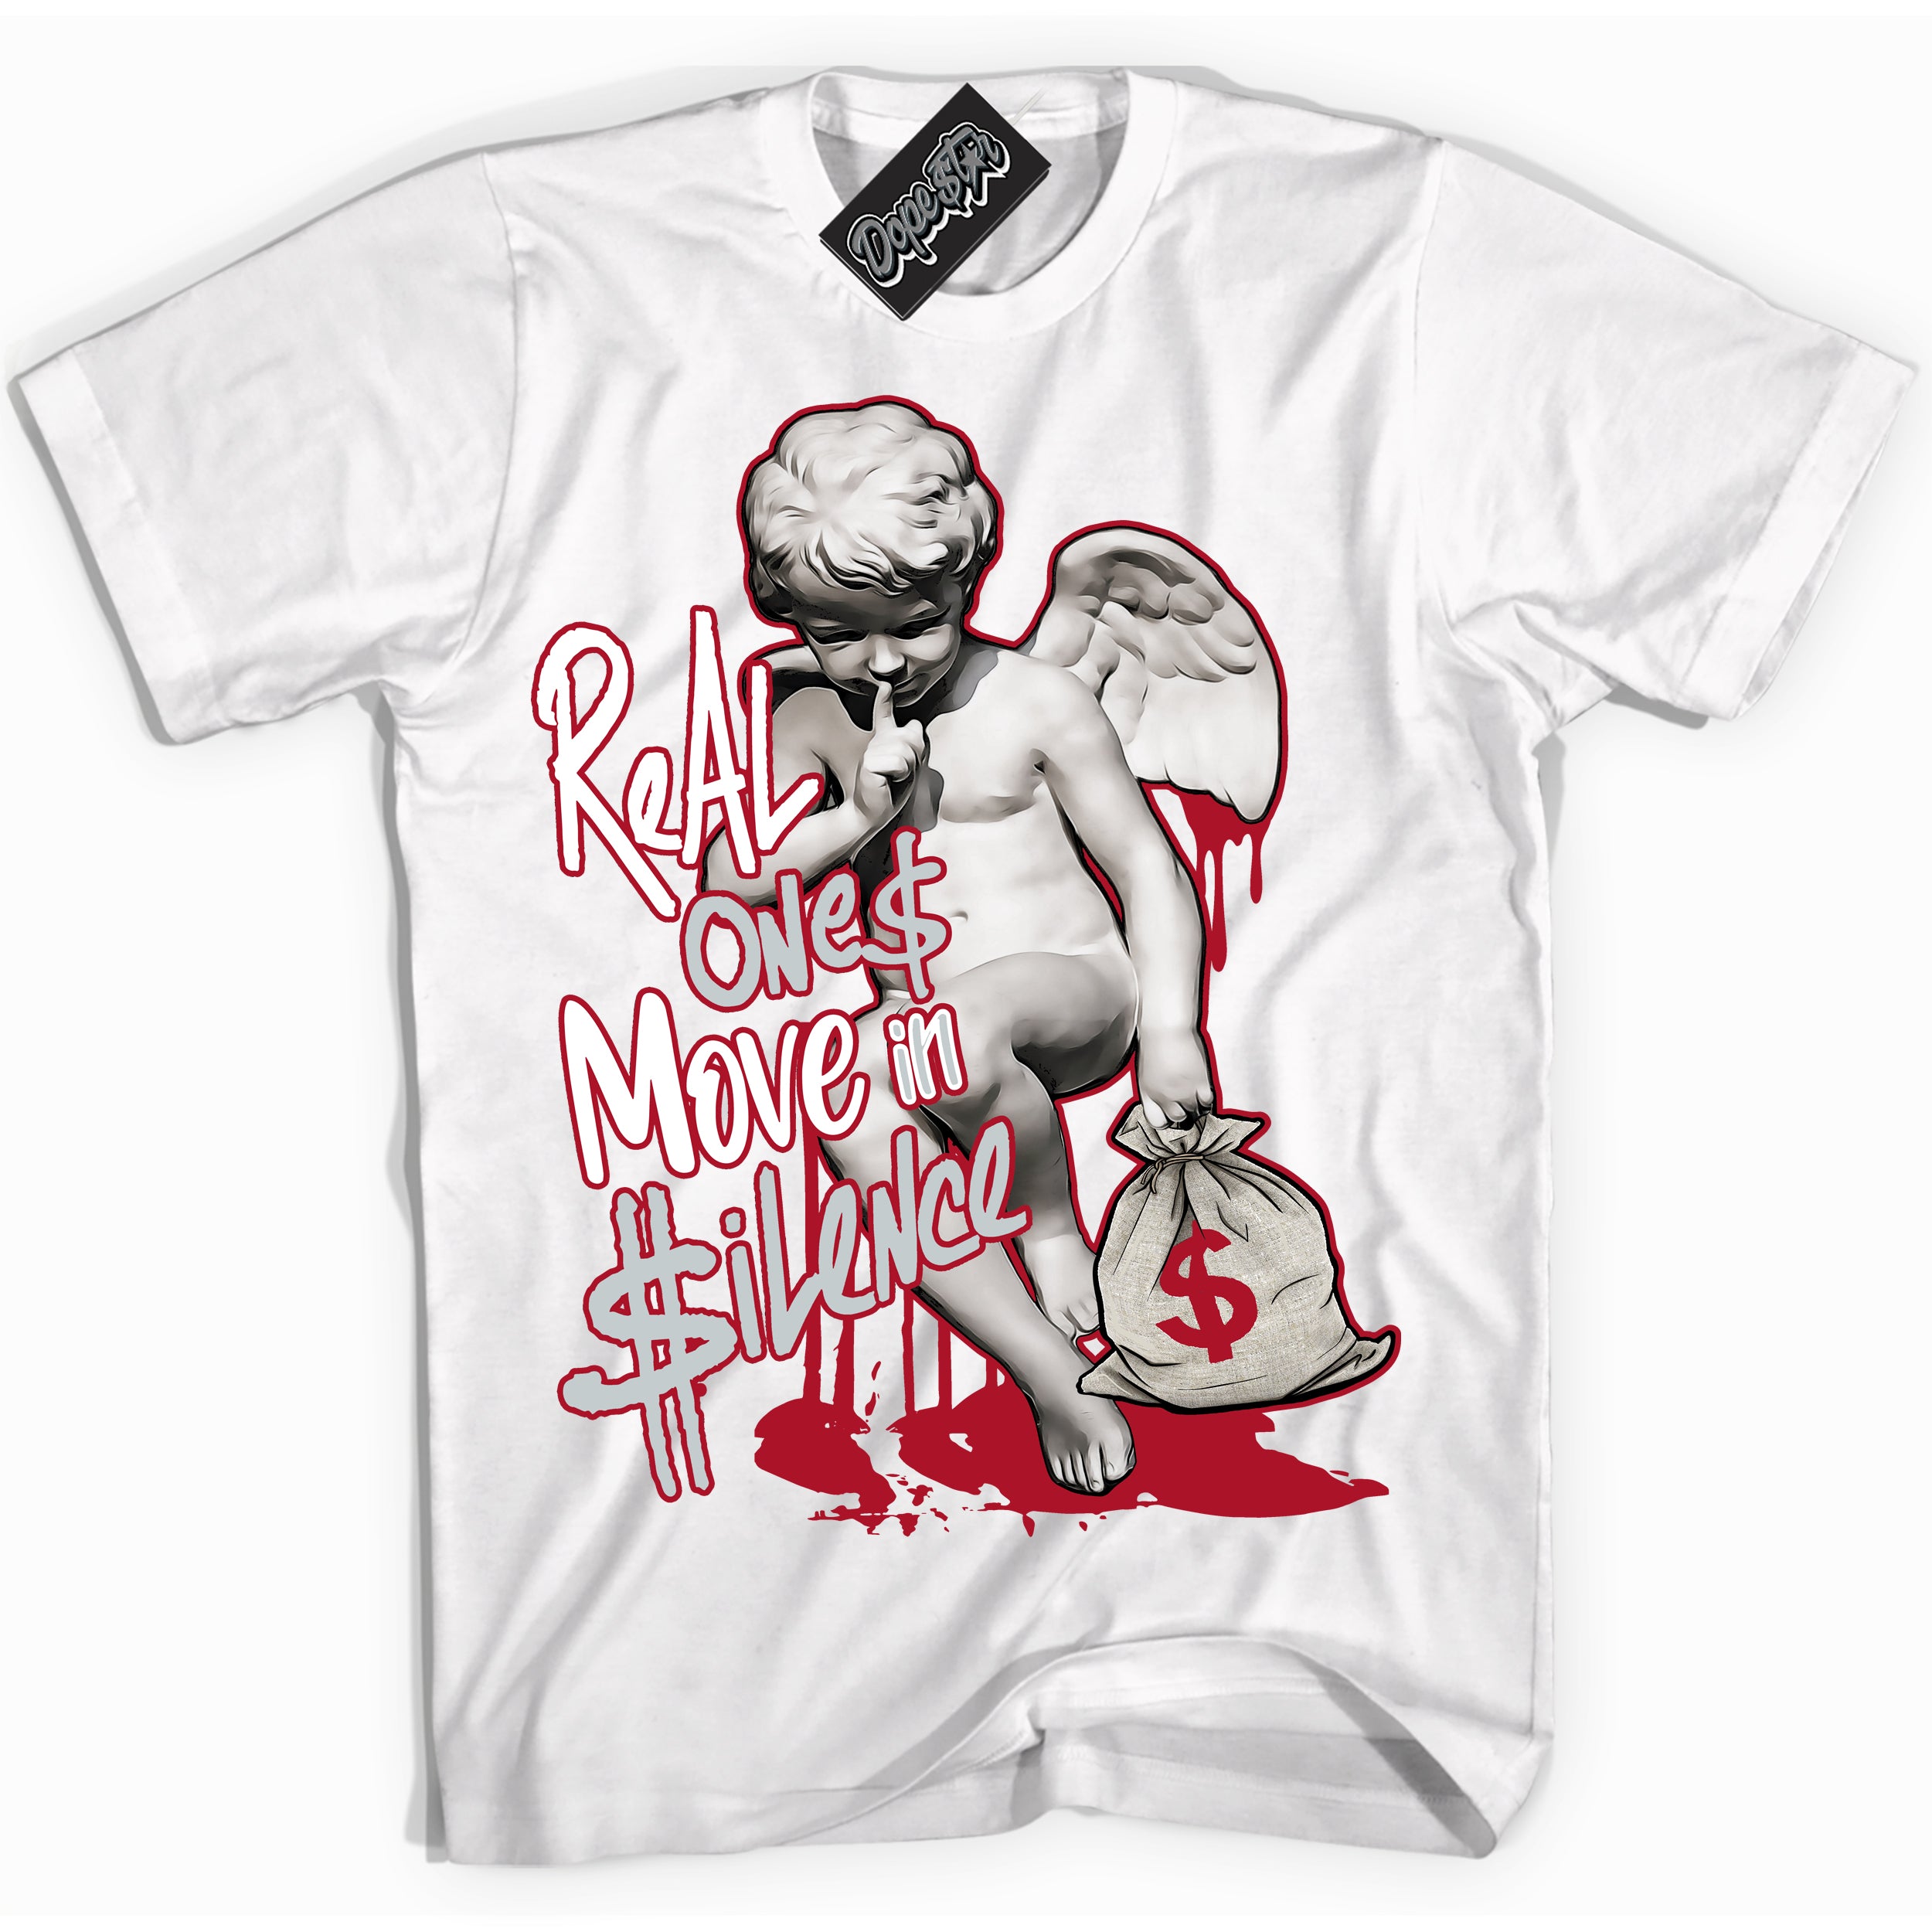 Cool White Shirt with “ Real Ones Cherub” design that perfectly matches Reverse Ultraman Sneakers.